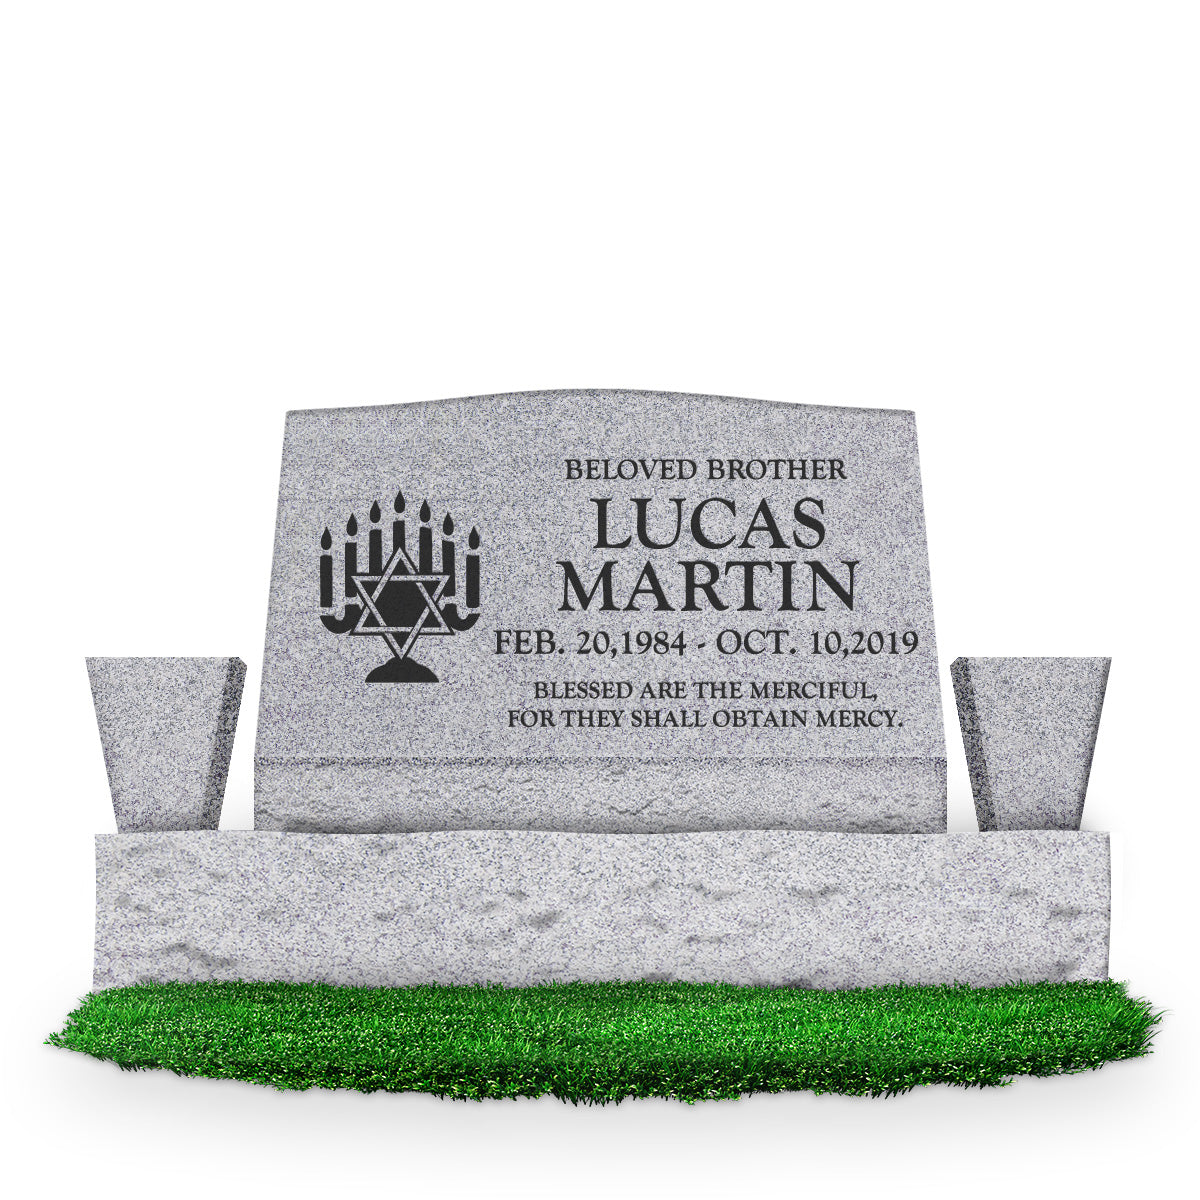 30″ x 10″ x 16″ Serp Top Slant Headstone with 42″ base and two square tapered vases